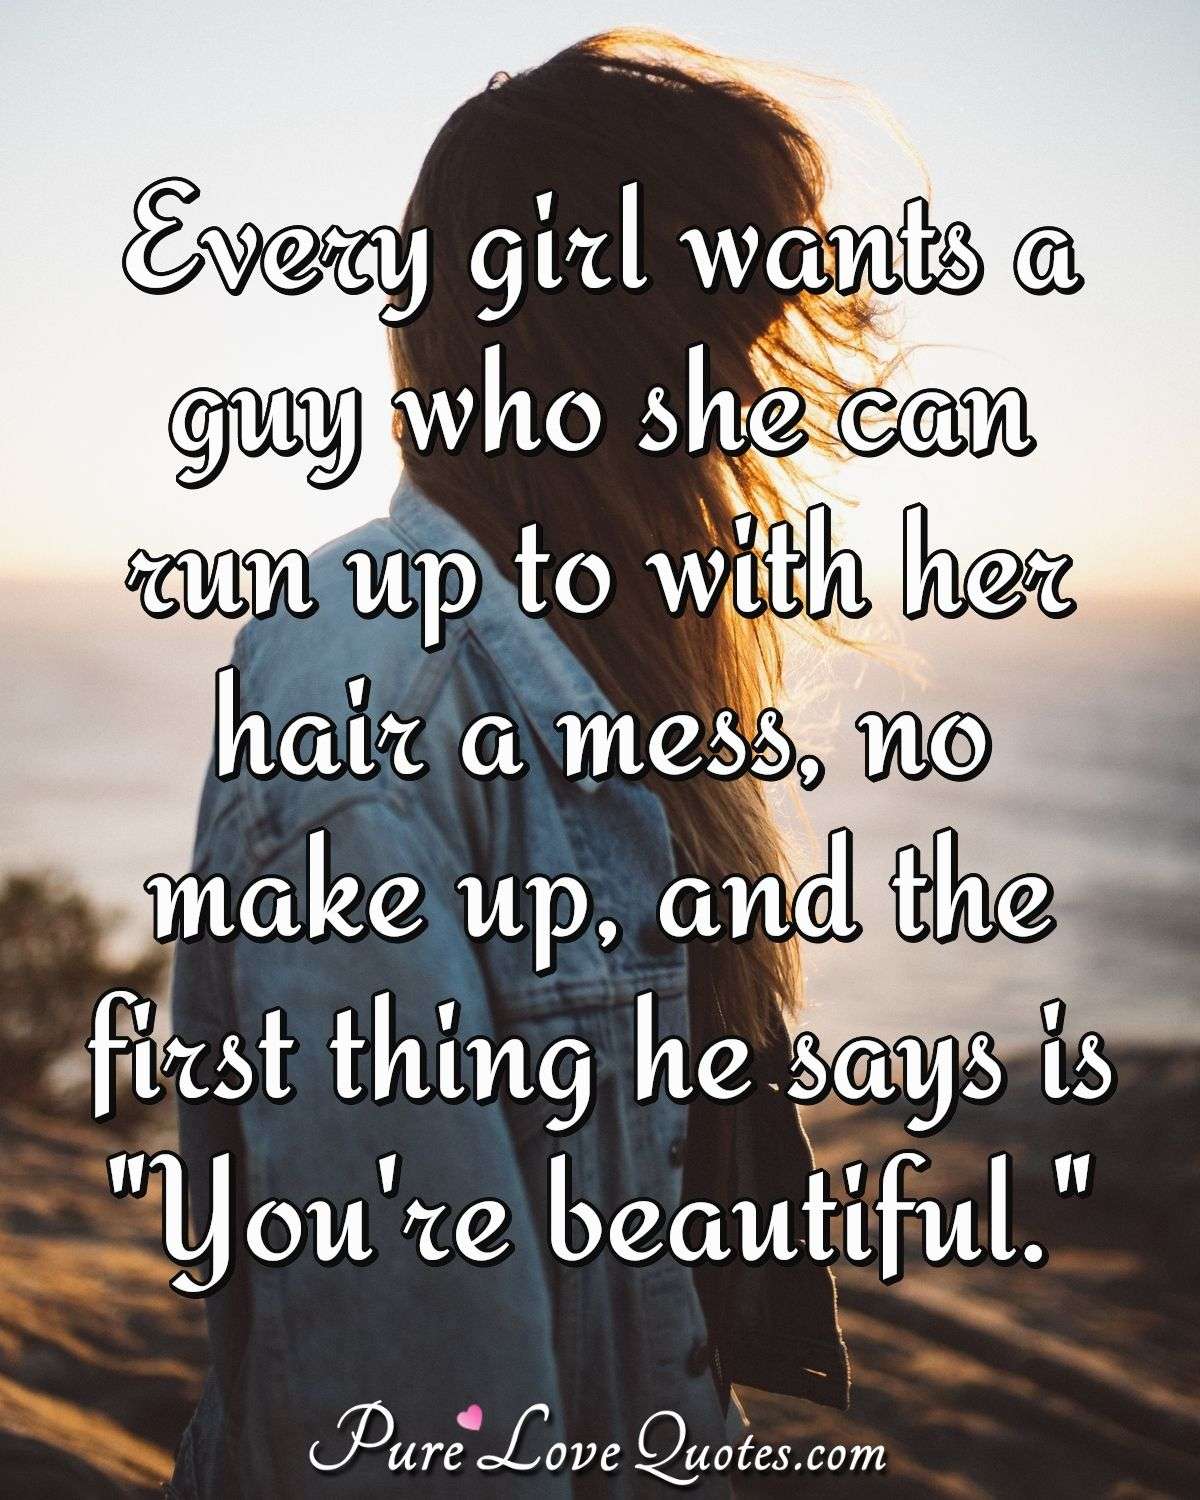 https://www.purelovequotes.com/images/quotes/1200/every-girl-wants-a-guy-who-she.jpg